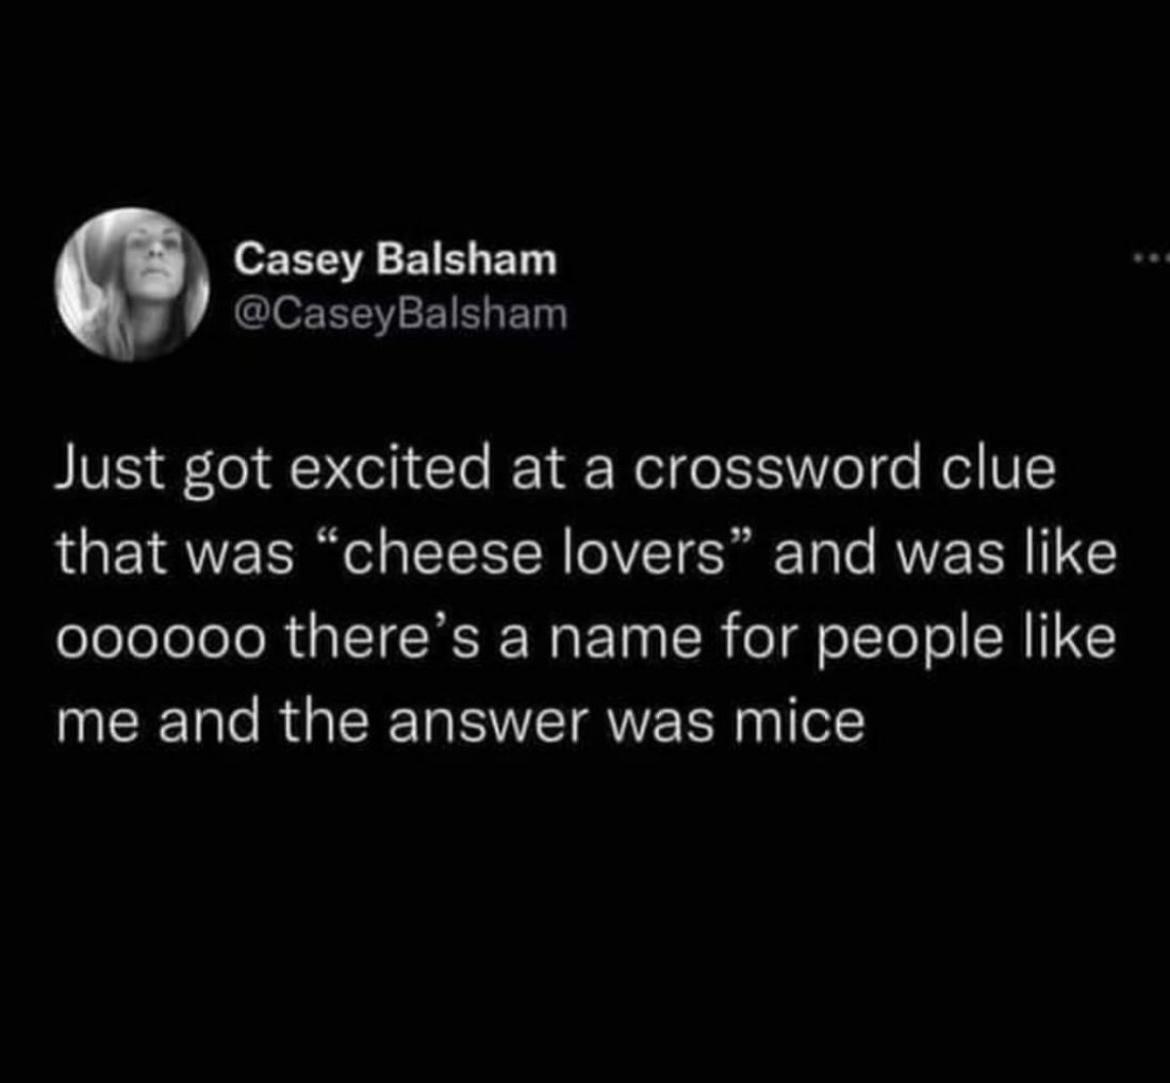 funny memes and pics - fish profile pic meme - Casey Balsham Balsham Just got excited at a crossword clue that was "cheese lovers" and was oooooo there's a name for people me and the answer was mice